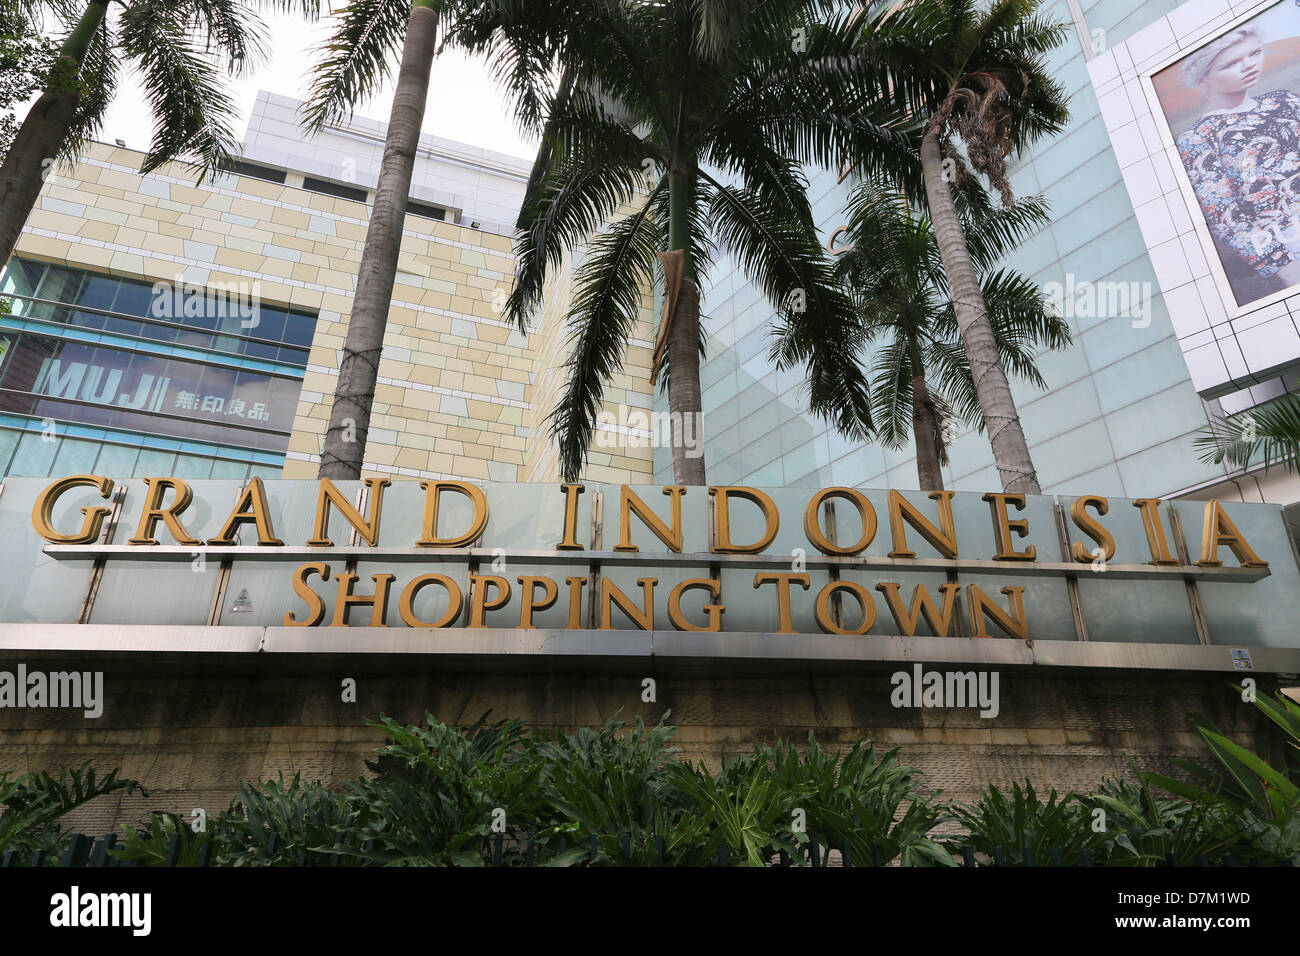 Grand Indonesia Shopping town sign, Central Jakarta, Indonesia Stock Photo